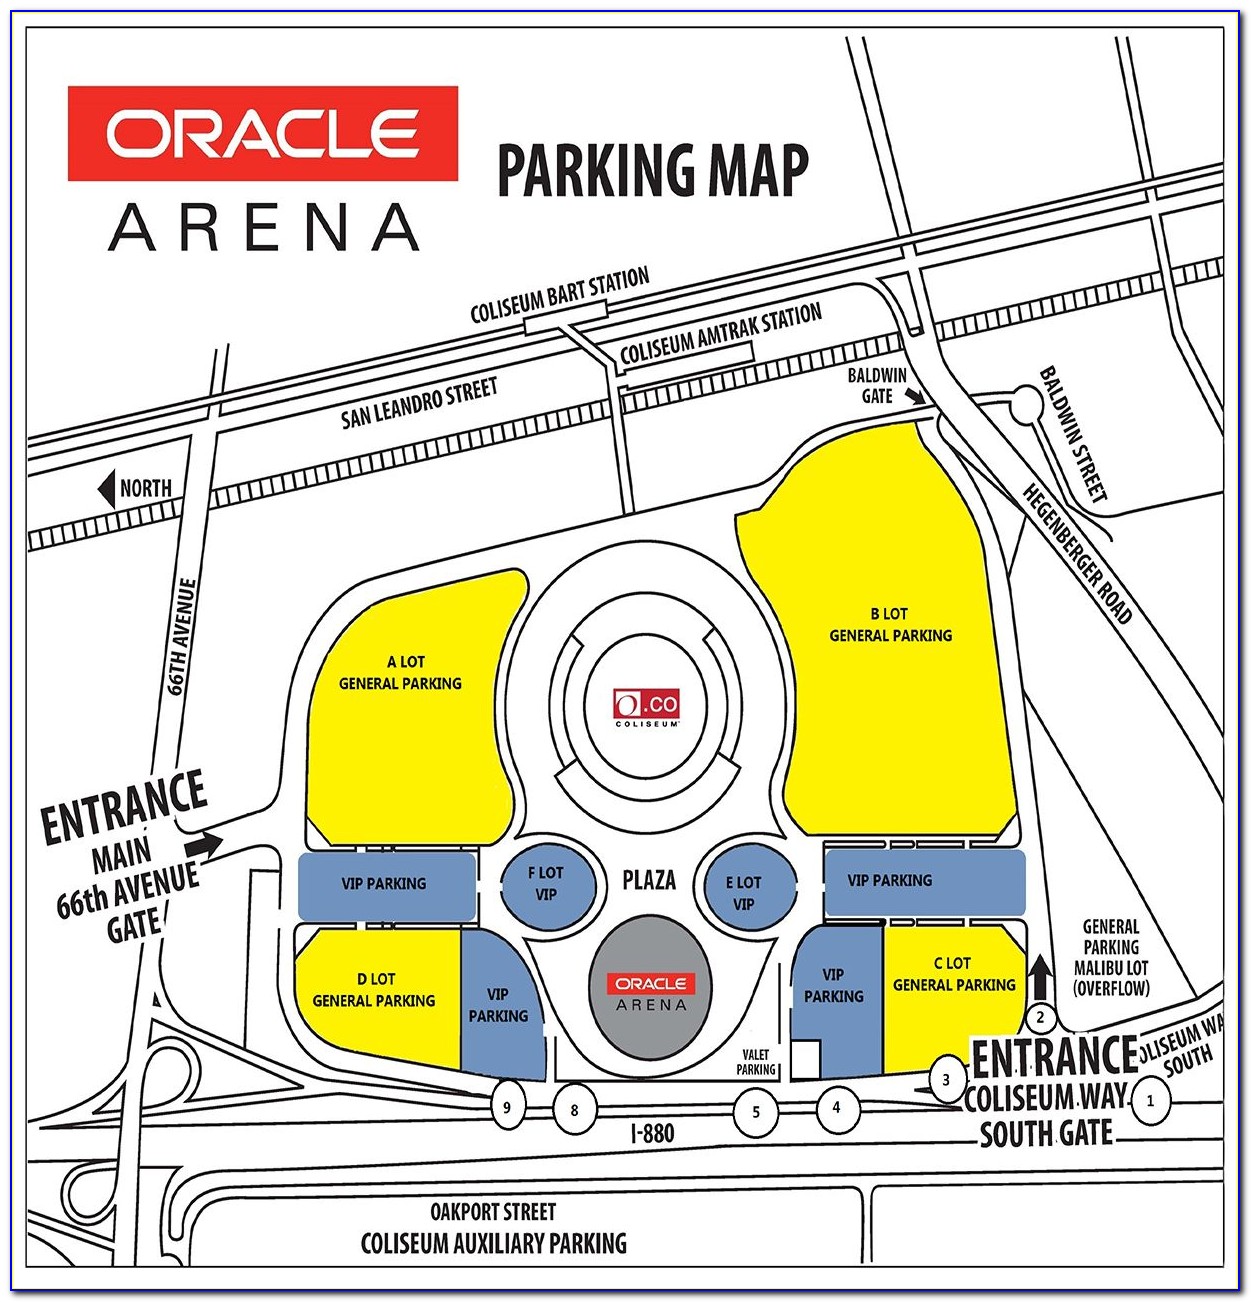 Oracle Arena Entrance Map